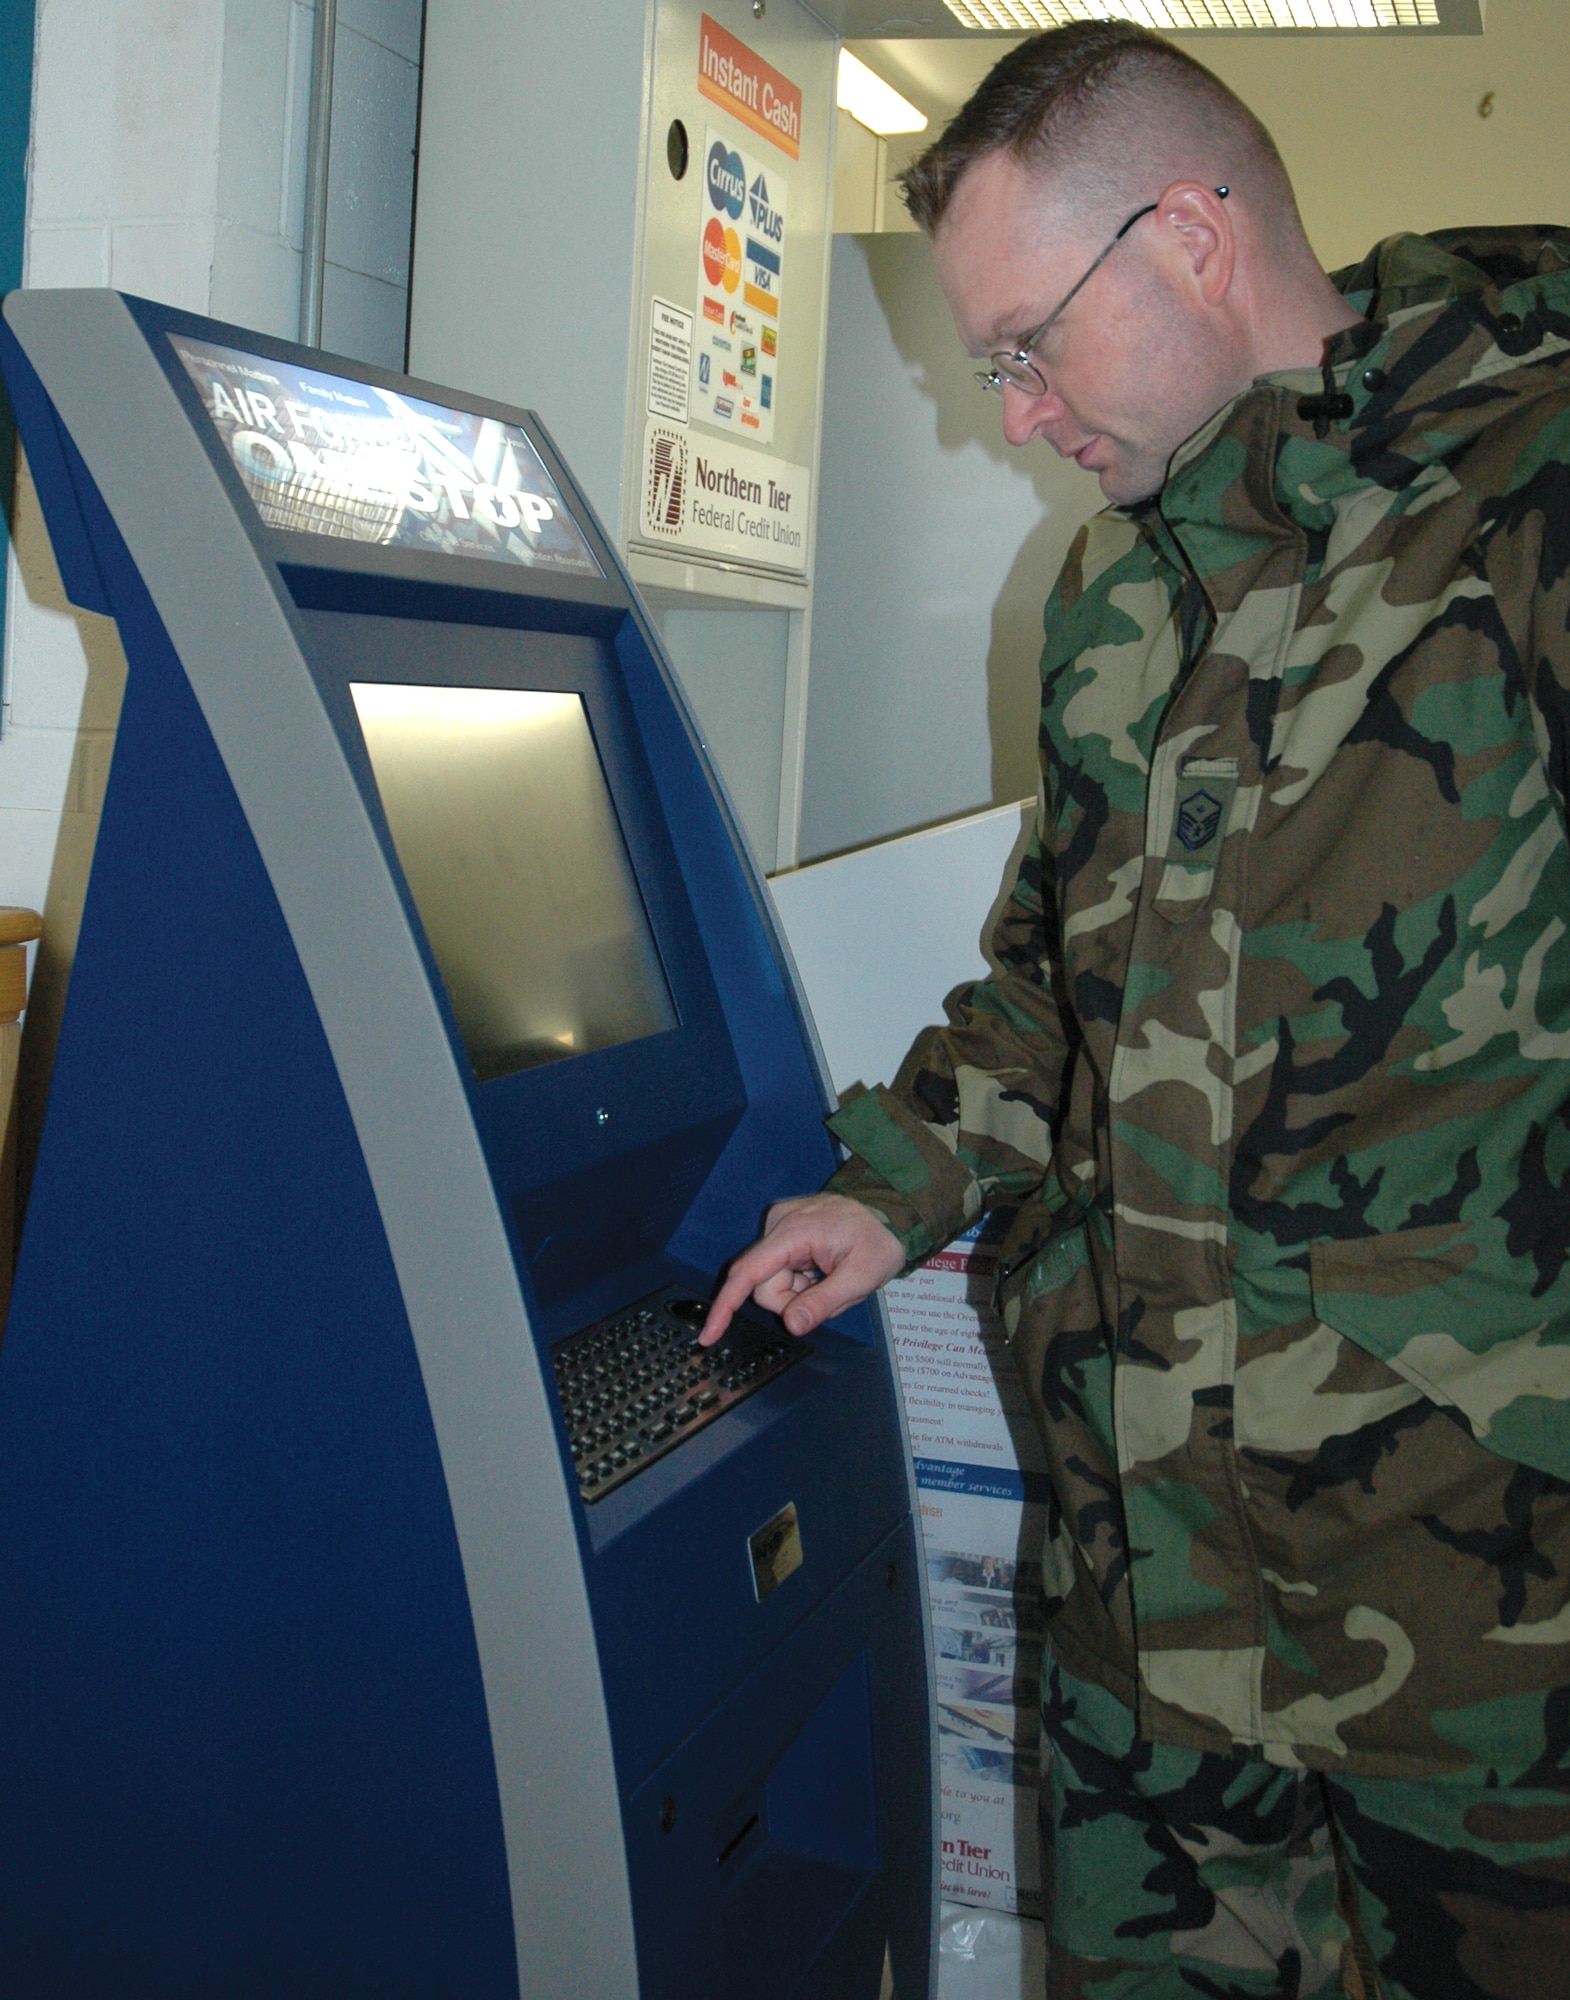 Master Sgt. Christopher Kozel, 91st Operations Group, uses the Air Force OneStop kiosk located inside the Shoppette for the first time Tuesday. (U.S. Air Force photo by Senior Airman Danny Monahan)